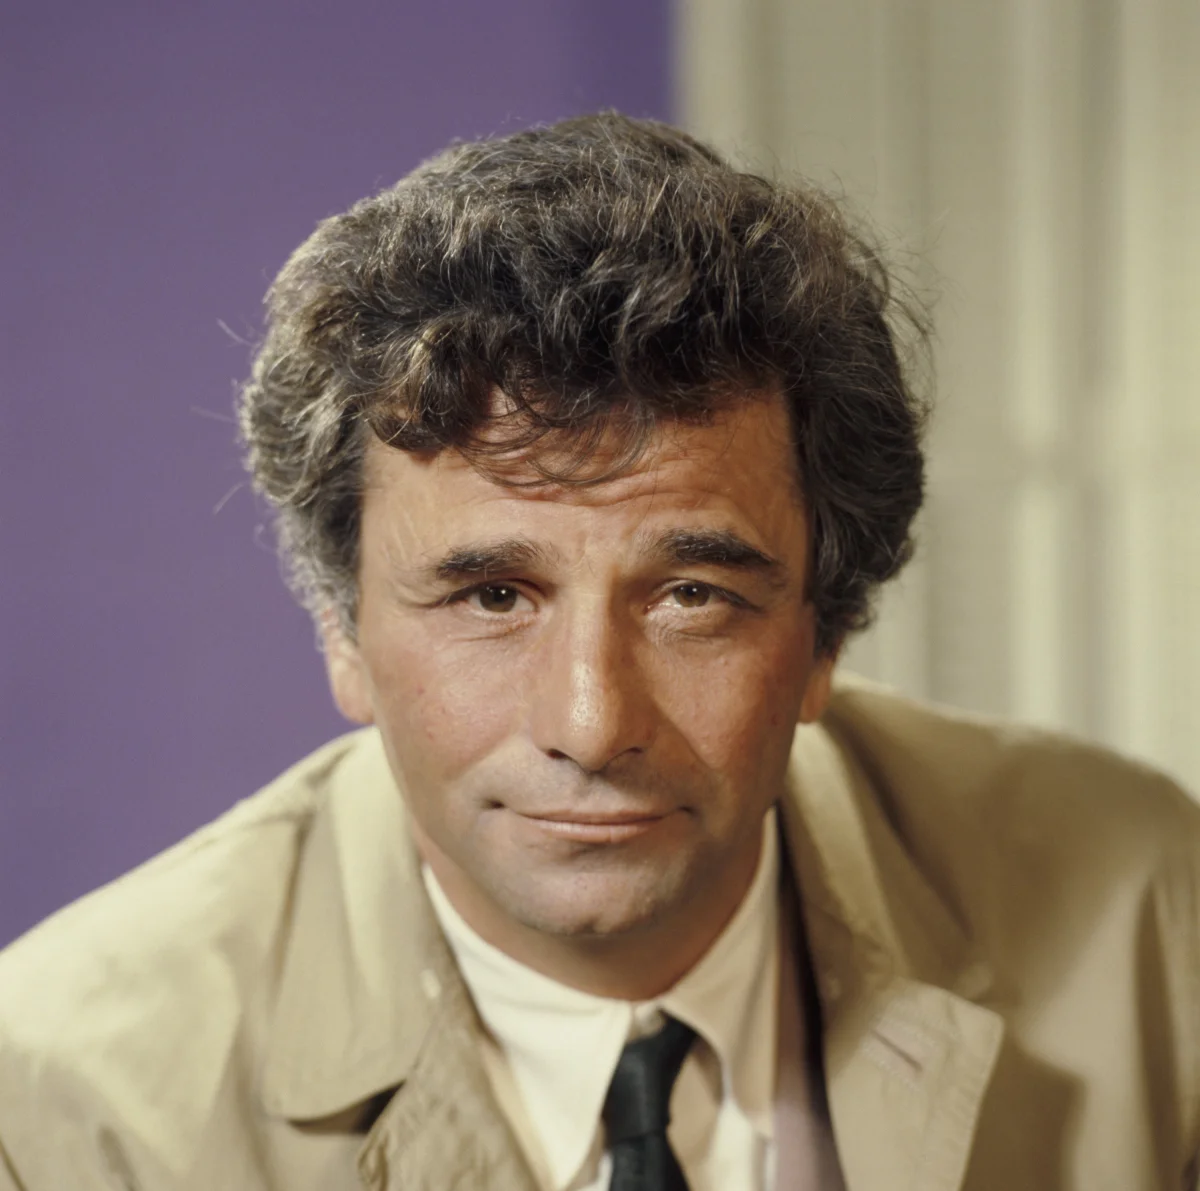 Peter Falk Dressed as Lieutenant Columbo News Photo - Getty Images